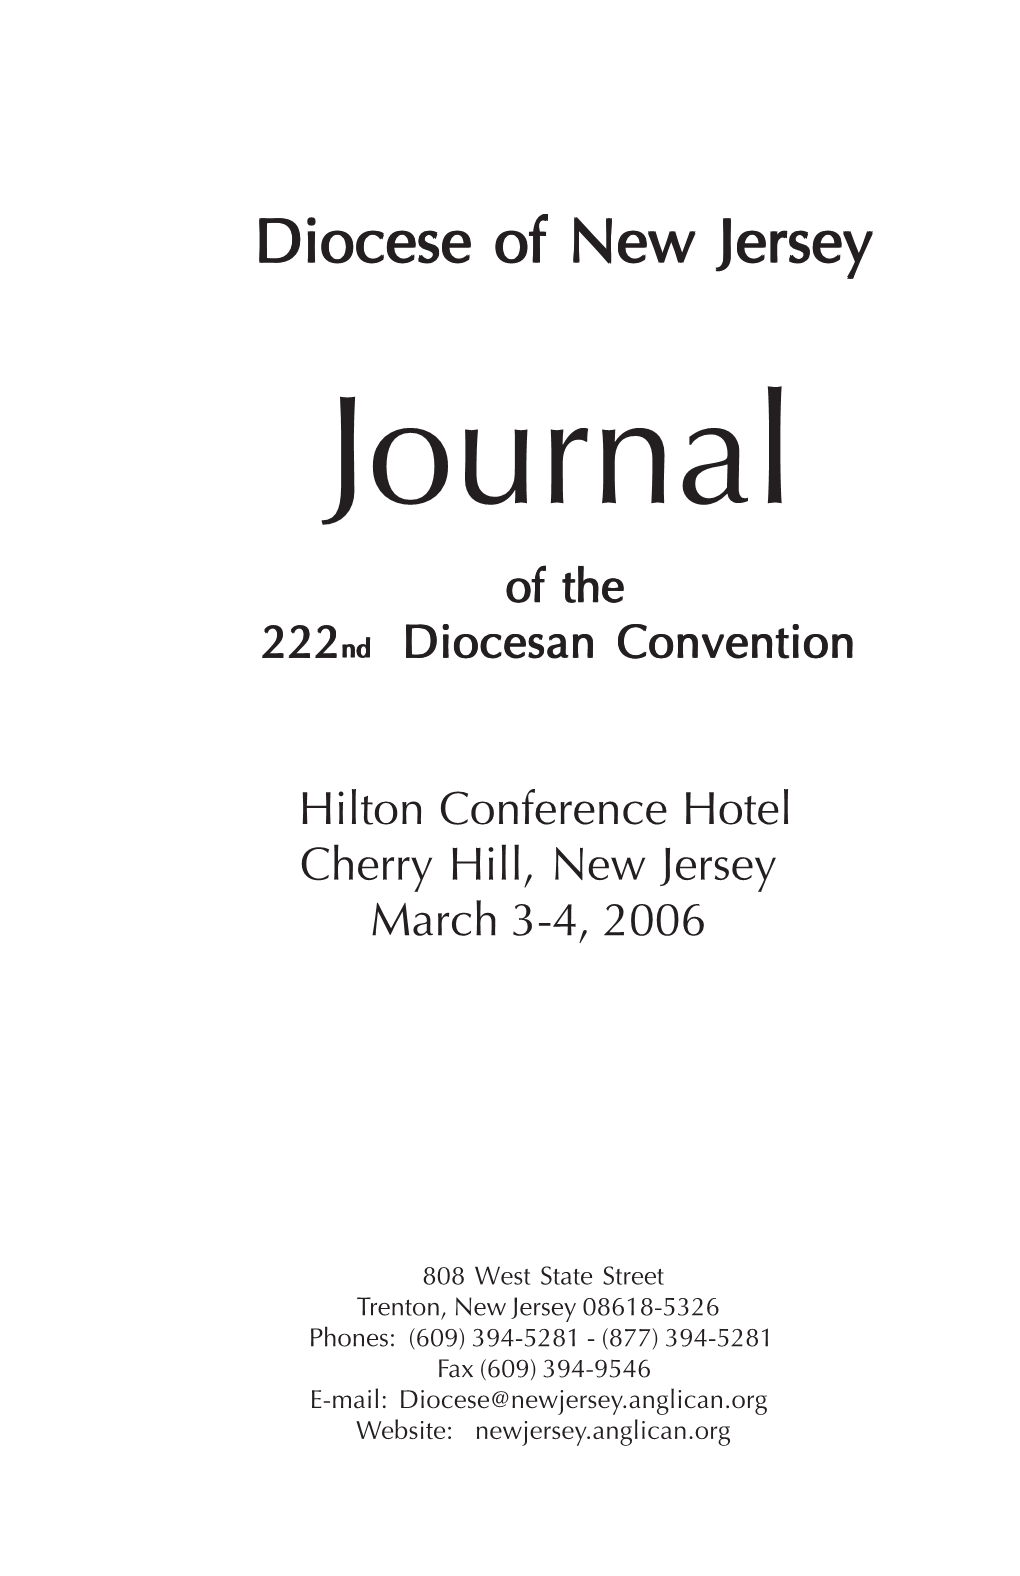 Diocese of New Jersey Journal O F Th E of the 2 2 2 222Ndndnd Diocesan Convention